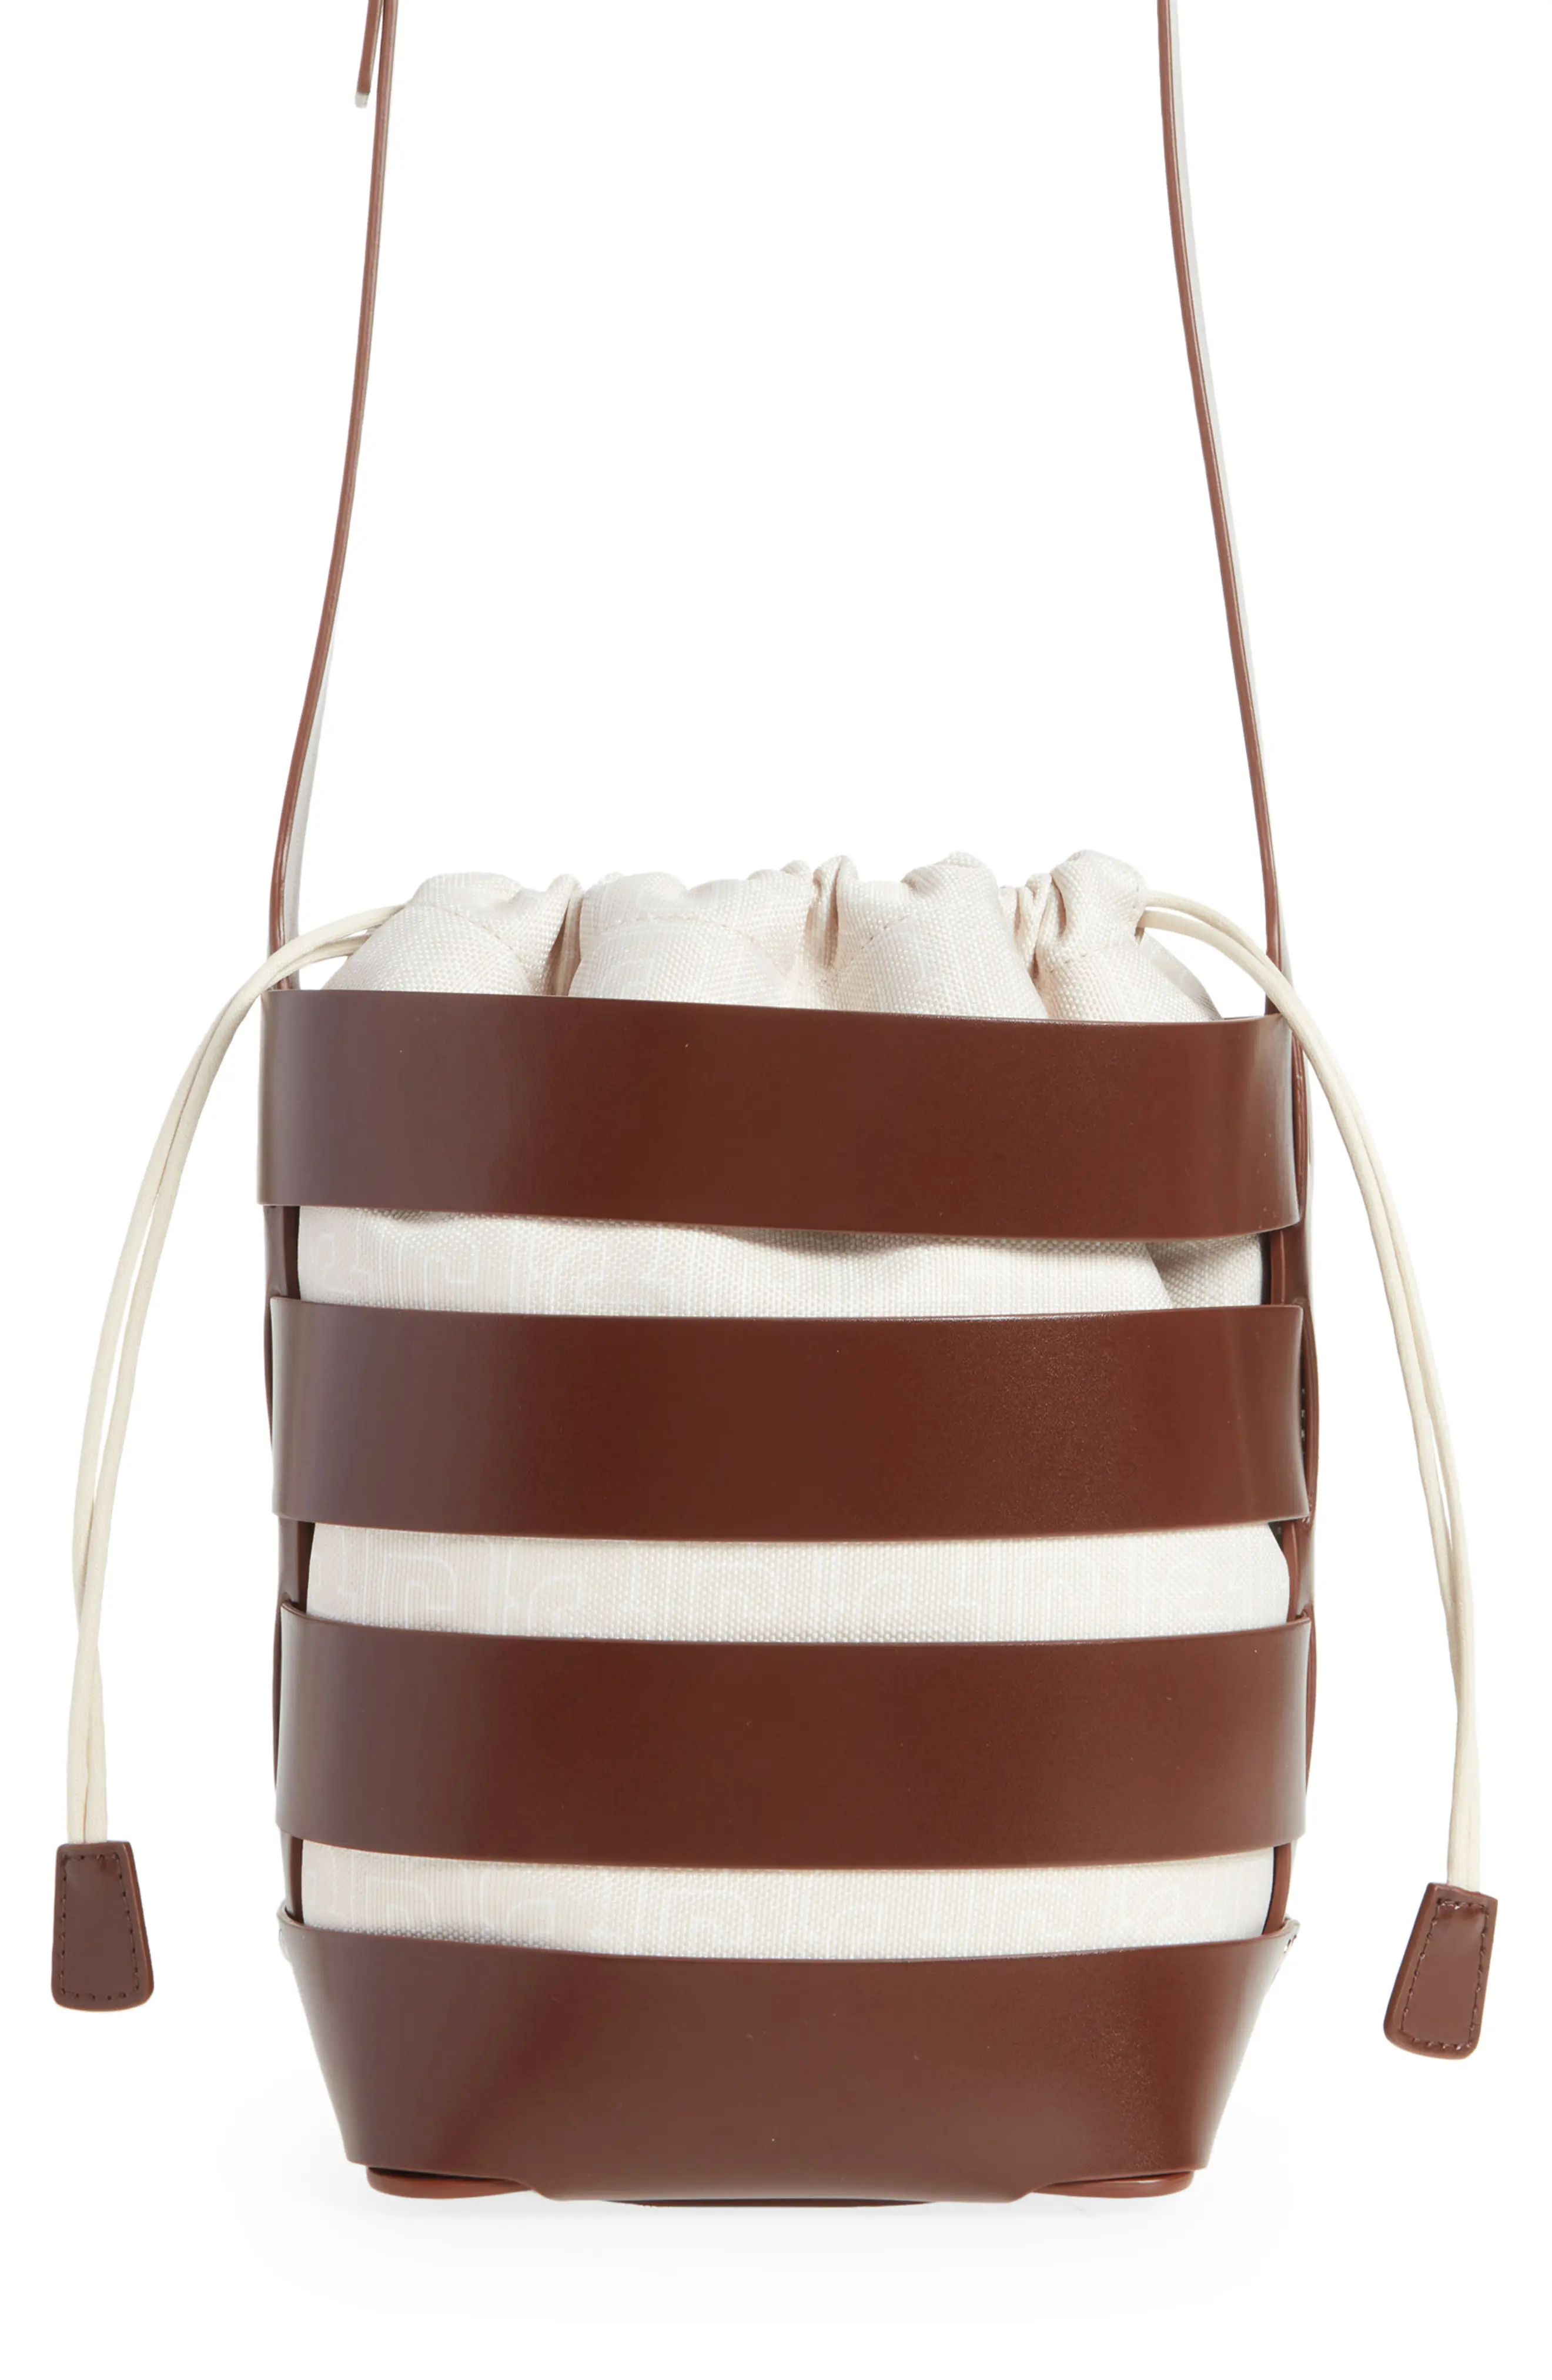 paco rabanne Cage Leather Bucket Bag in P200 Brown at Nordstrom | Nordstrom